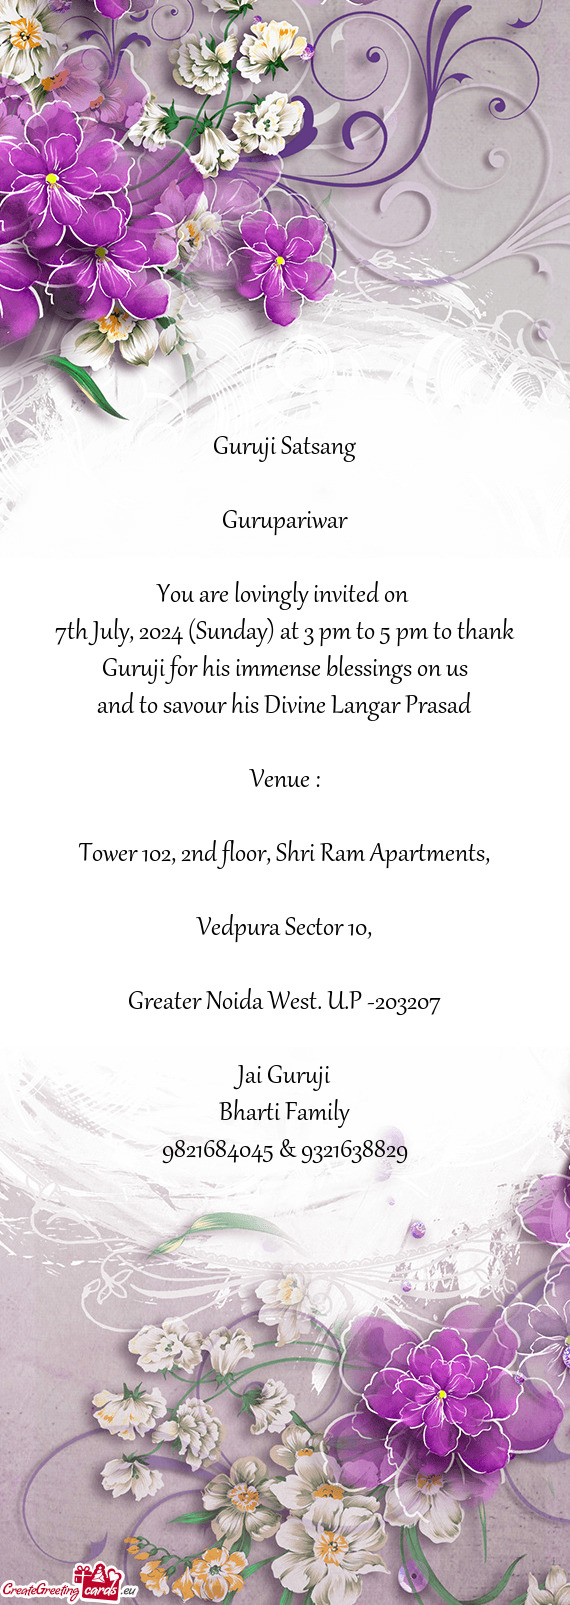 7th July, 2024 (Sunday) at 3 pm to 5 pm to thank Guruji for his immense blessings on us